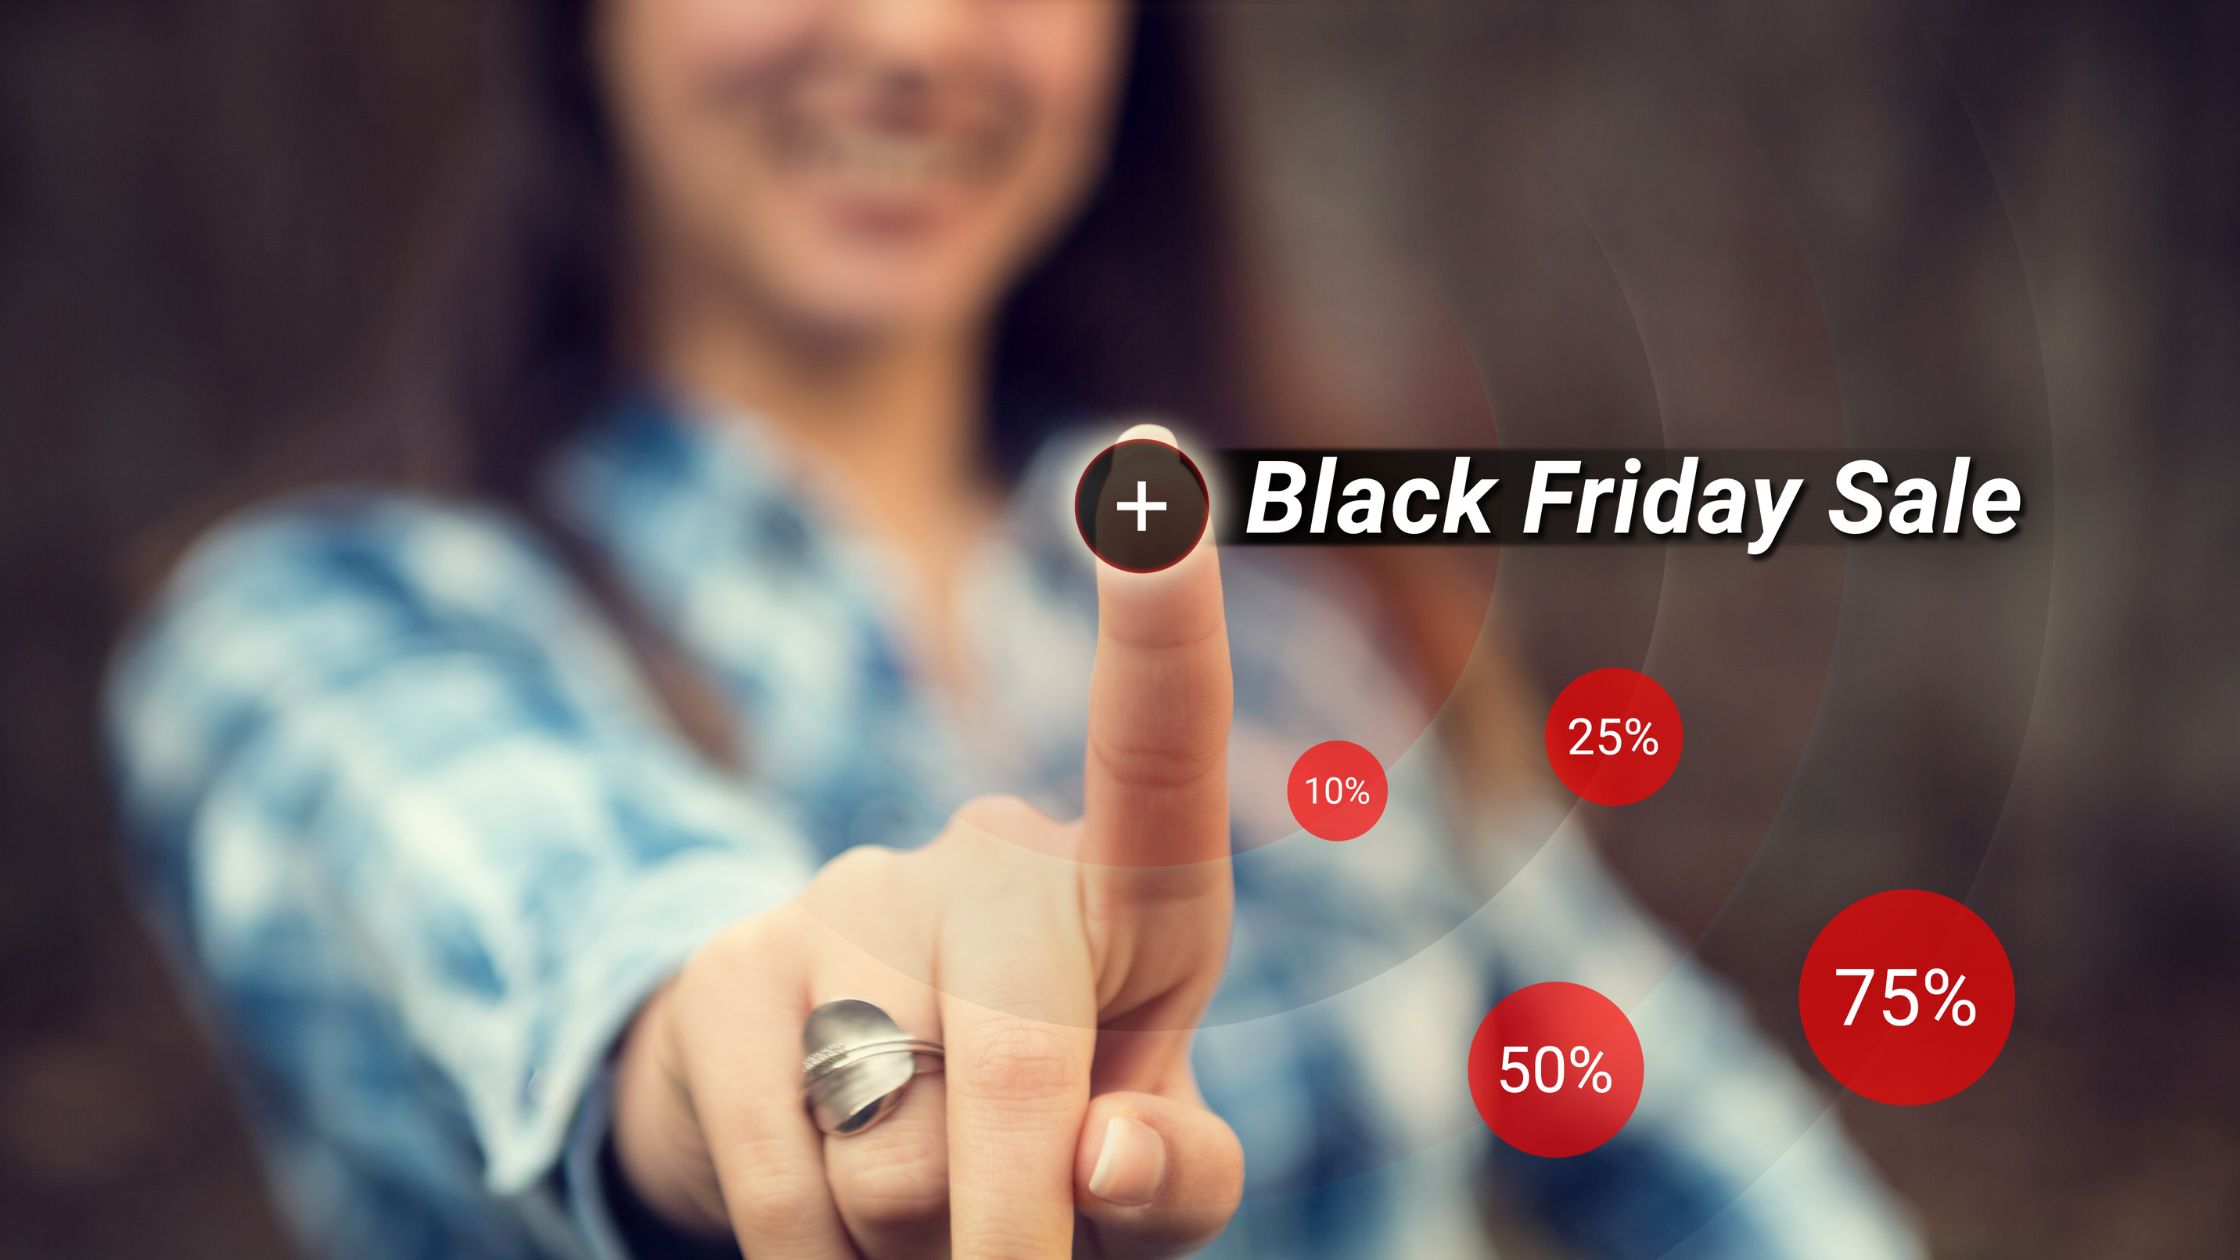 How to Prepare Your Online Store for eCommerce Black Friday